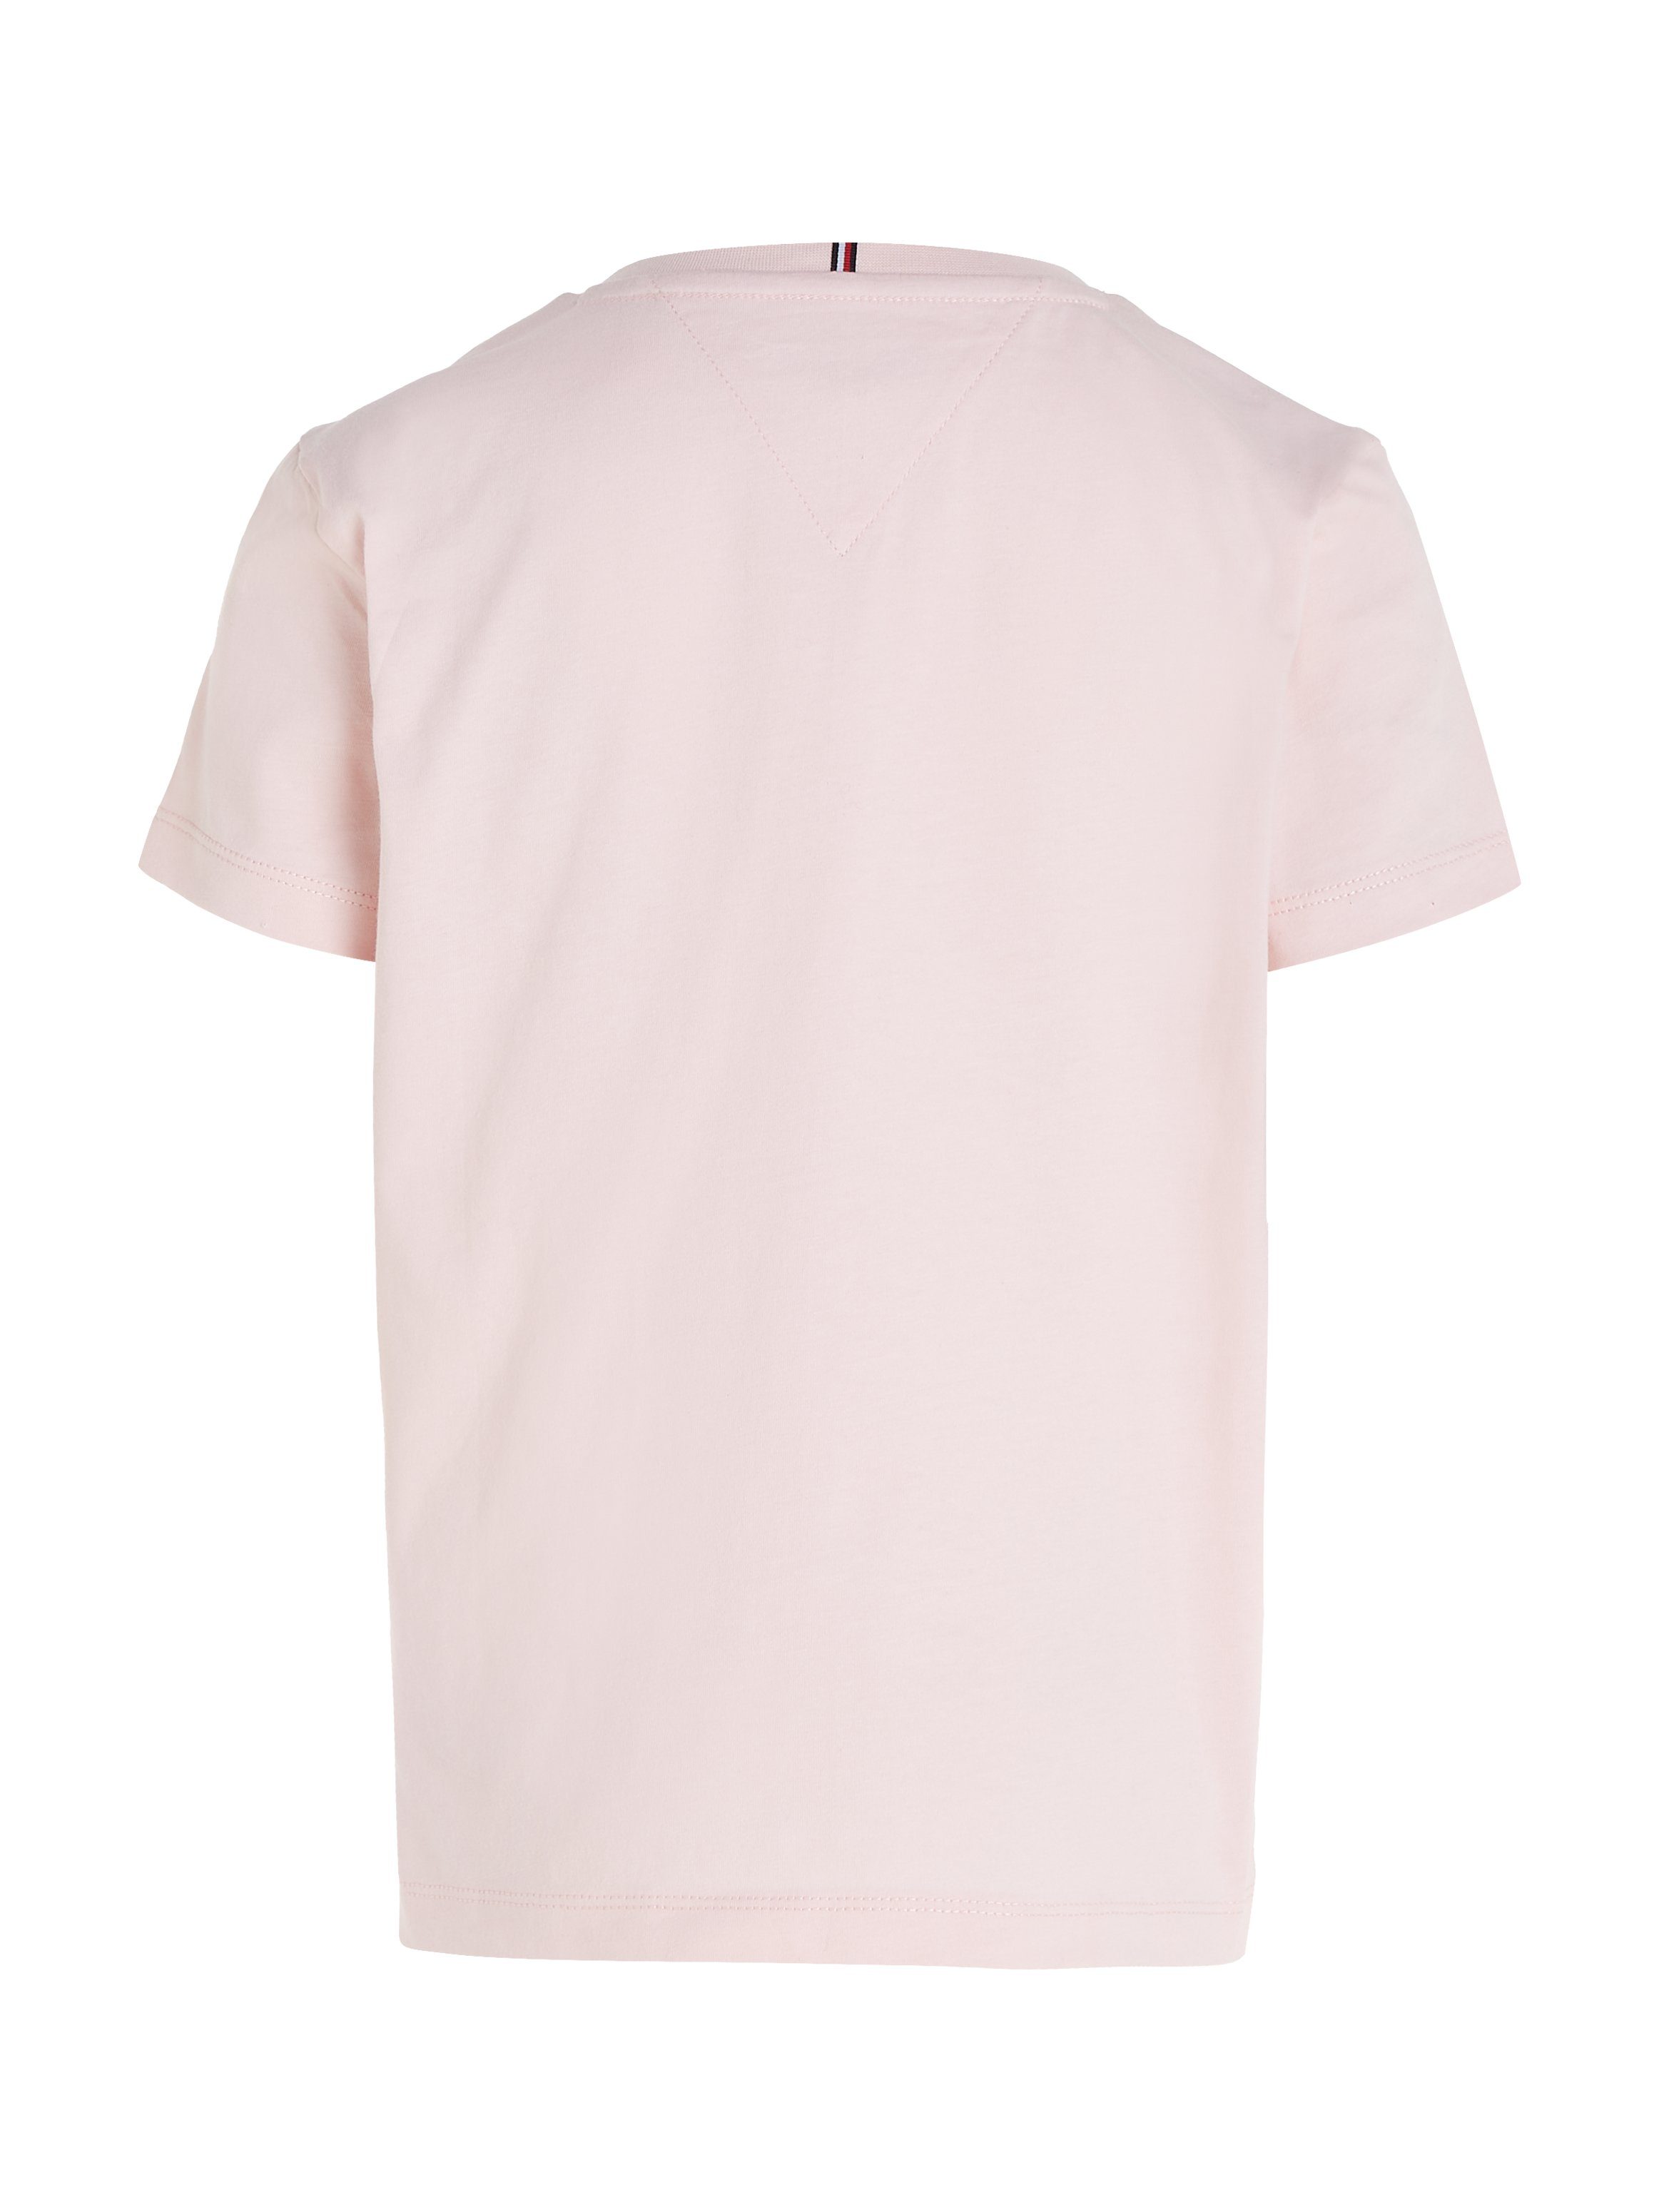 Druck TOMMY großem Tommy Whimsy mit T-Shirt Hilfiger BAGELS S/S Pink TEE